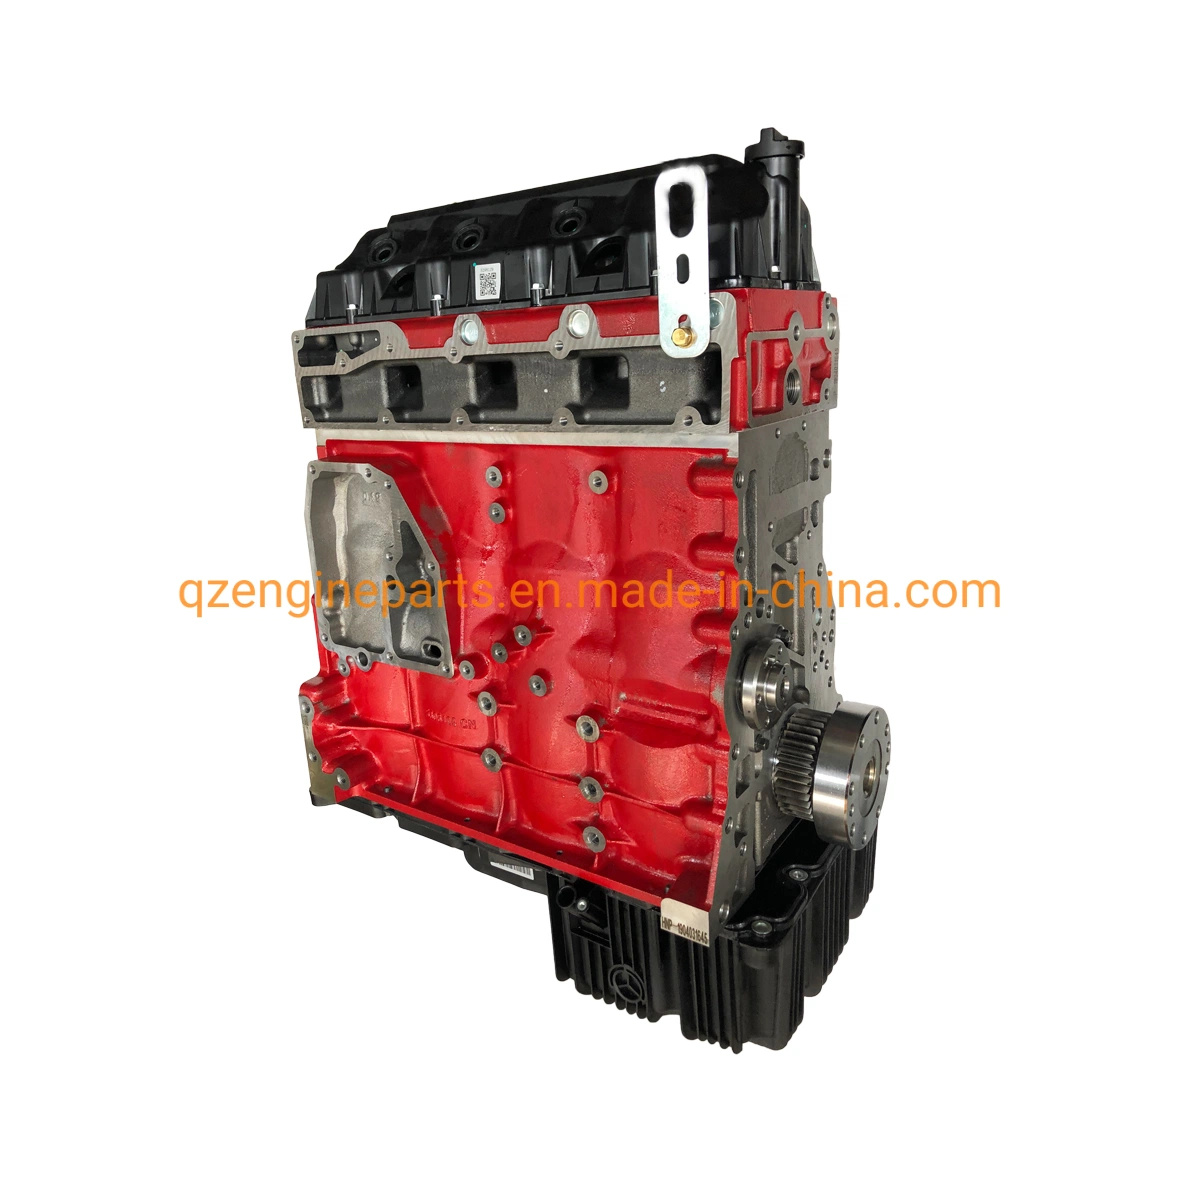 Auto Engine Parts Isf2,8 Isf3,8 Motor Long Block Bare Engine Für Foton Pickup